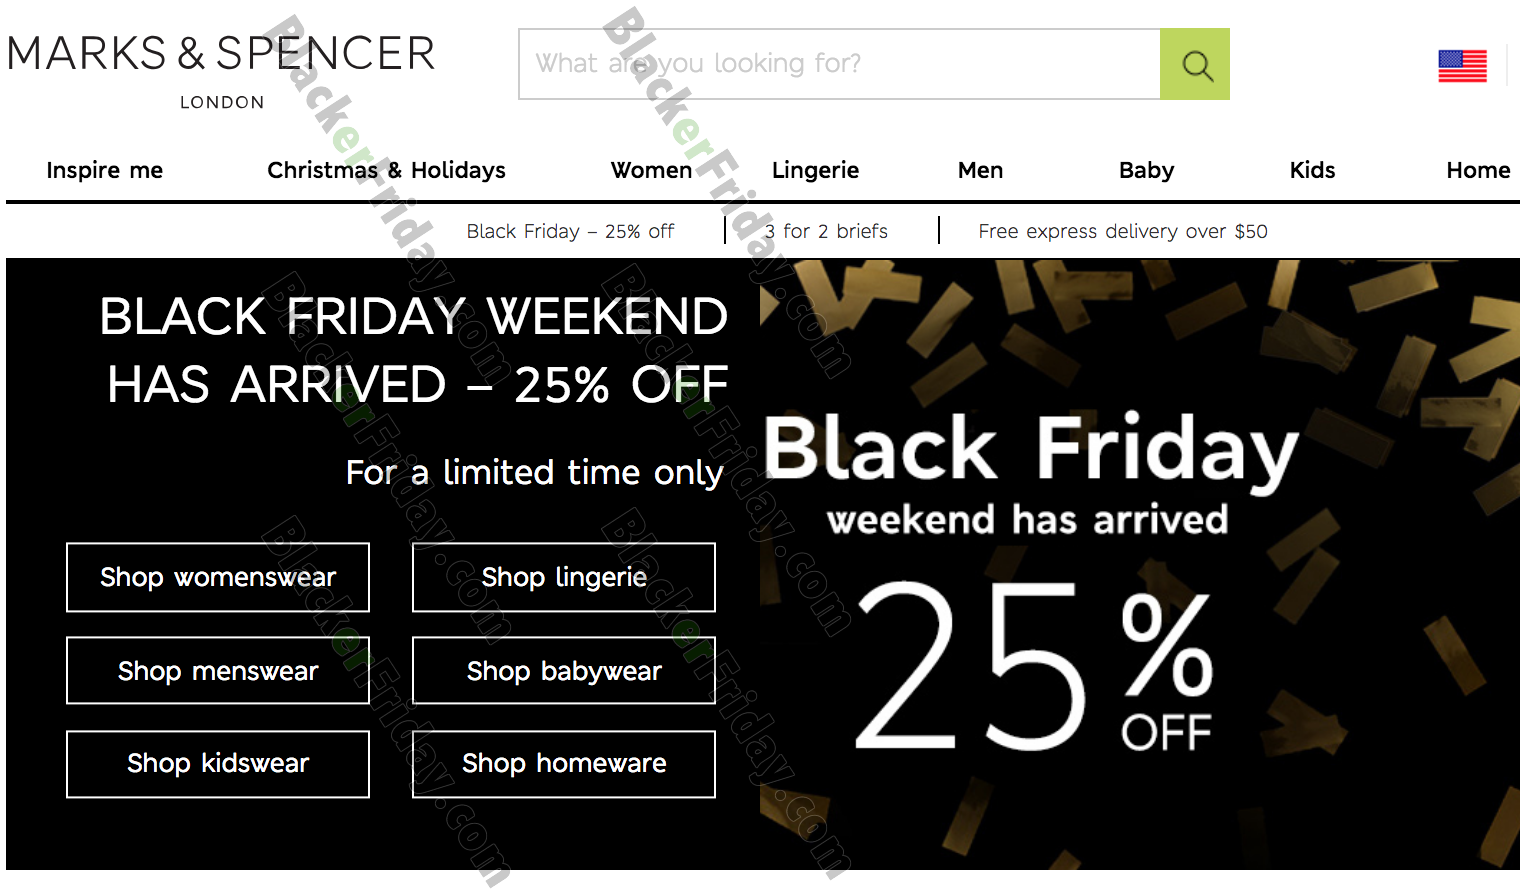 Marks & Spencer Black Friday 2021 Sale - What to Expect - Blacker Friday